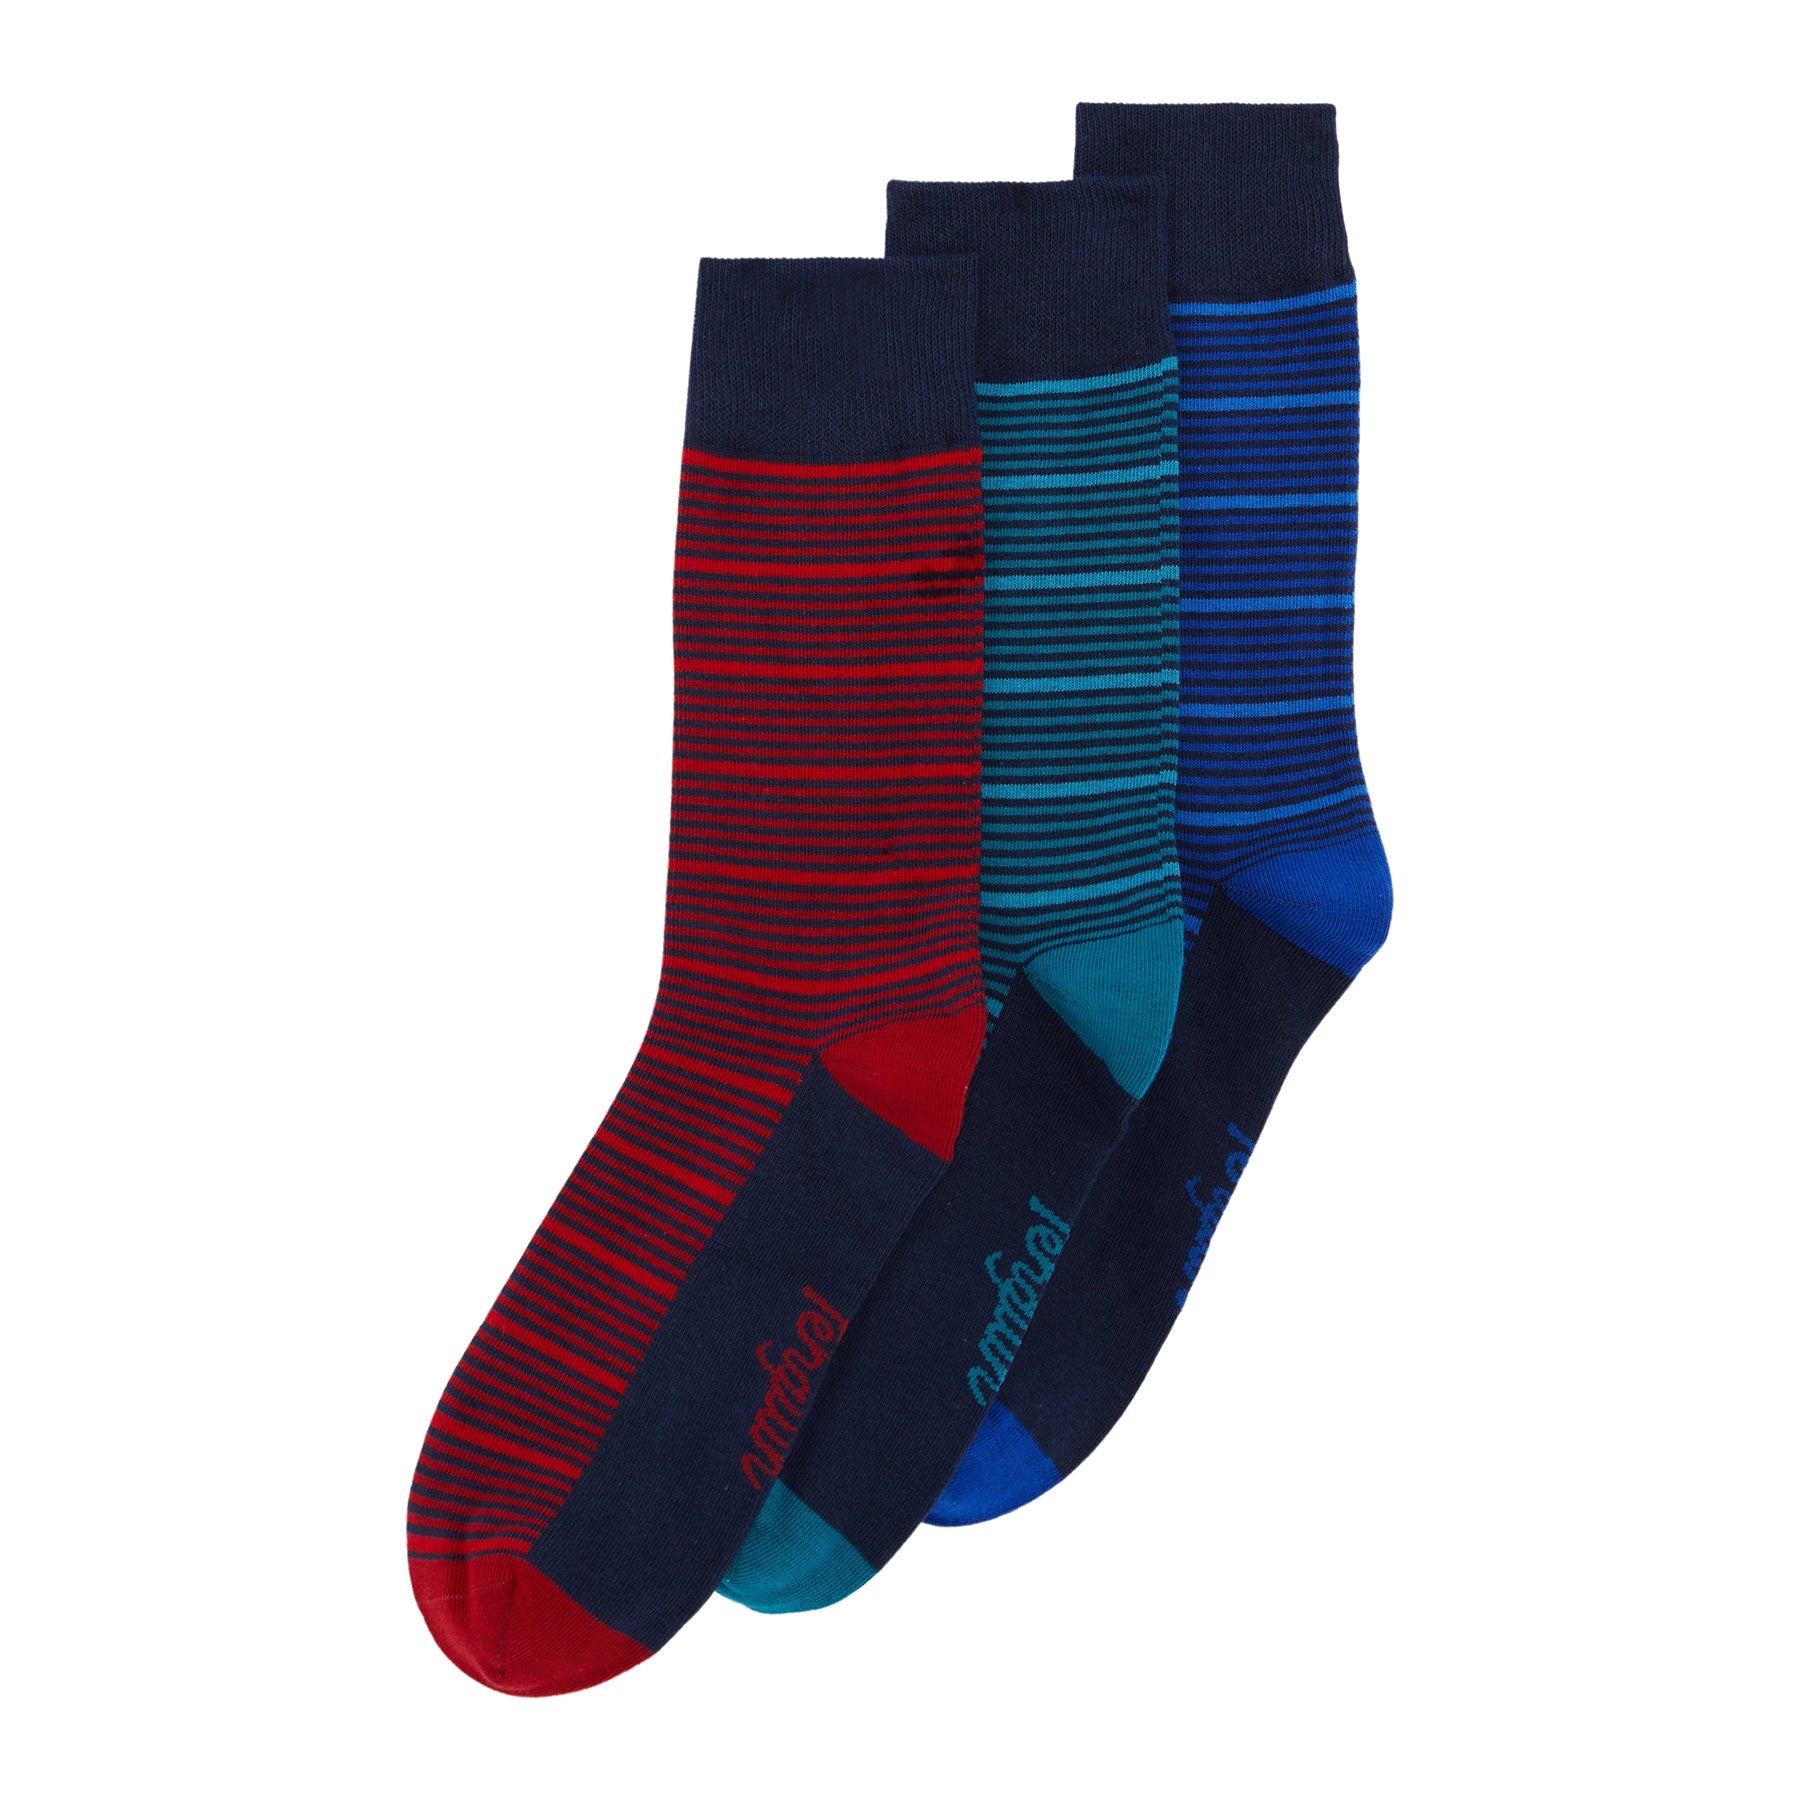 View 3 Pack Stripe Design Ankle Socks In Navy Red And Teal information